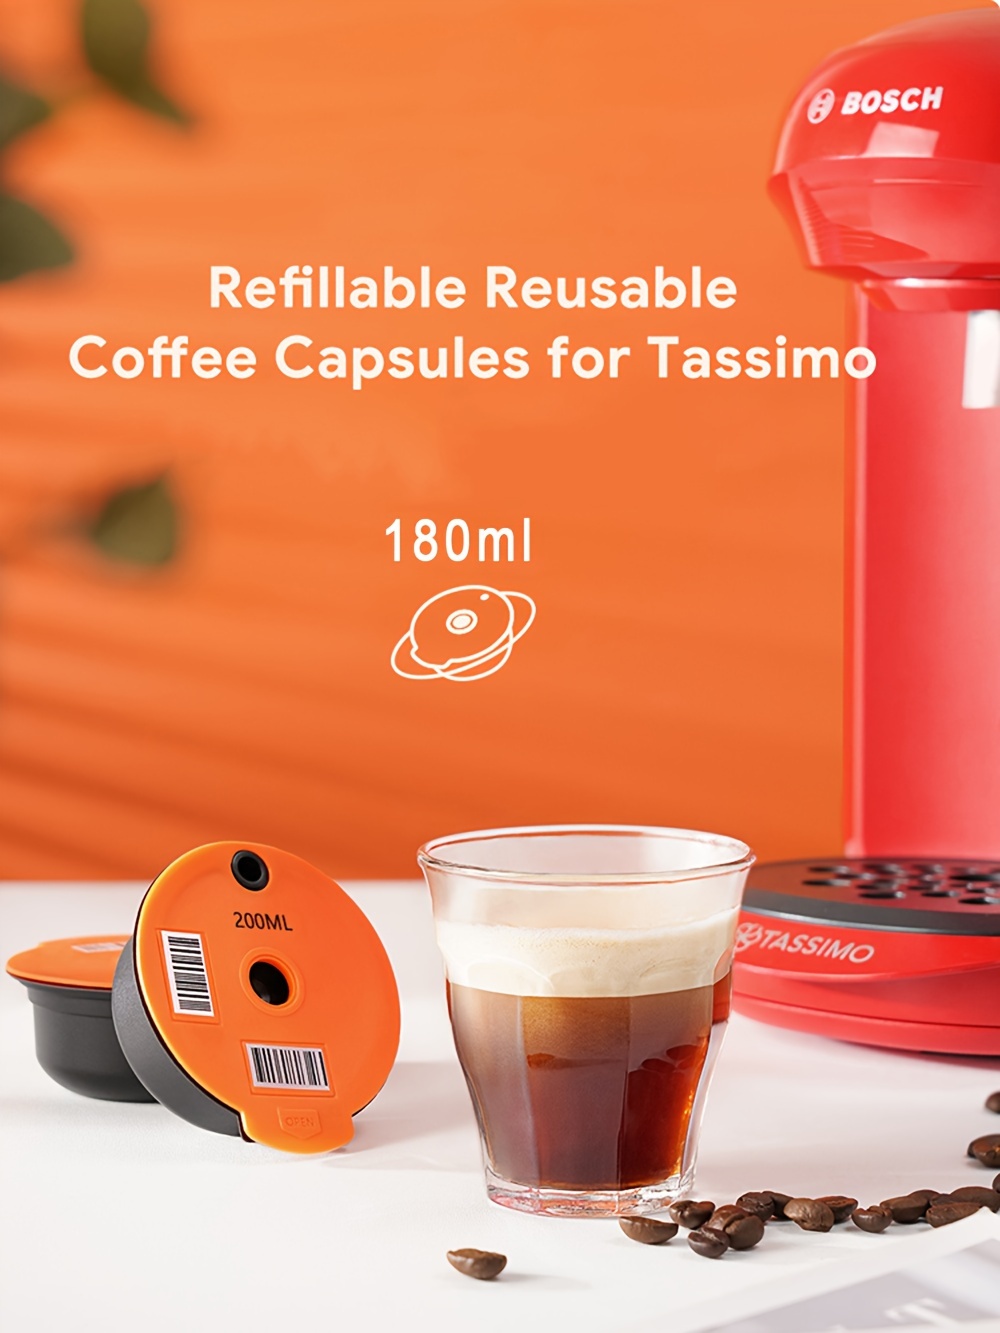 Reusable Coffee Capsules Bosch Coffee Maker - Refillable Coffee